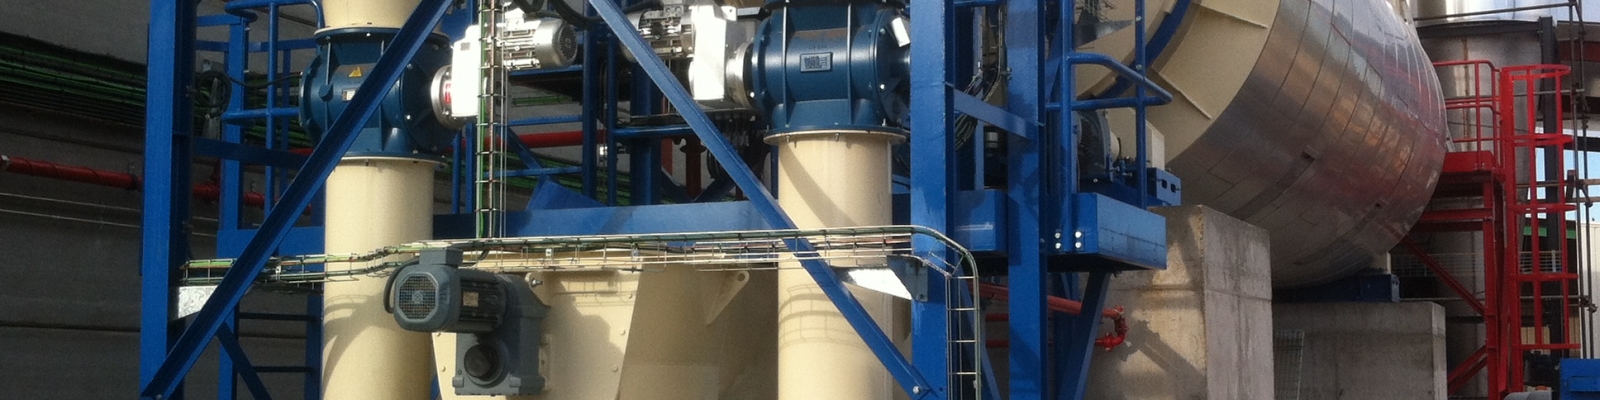 The production of bio-fuel from wood fibre